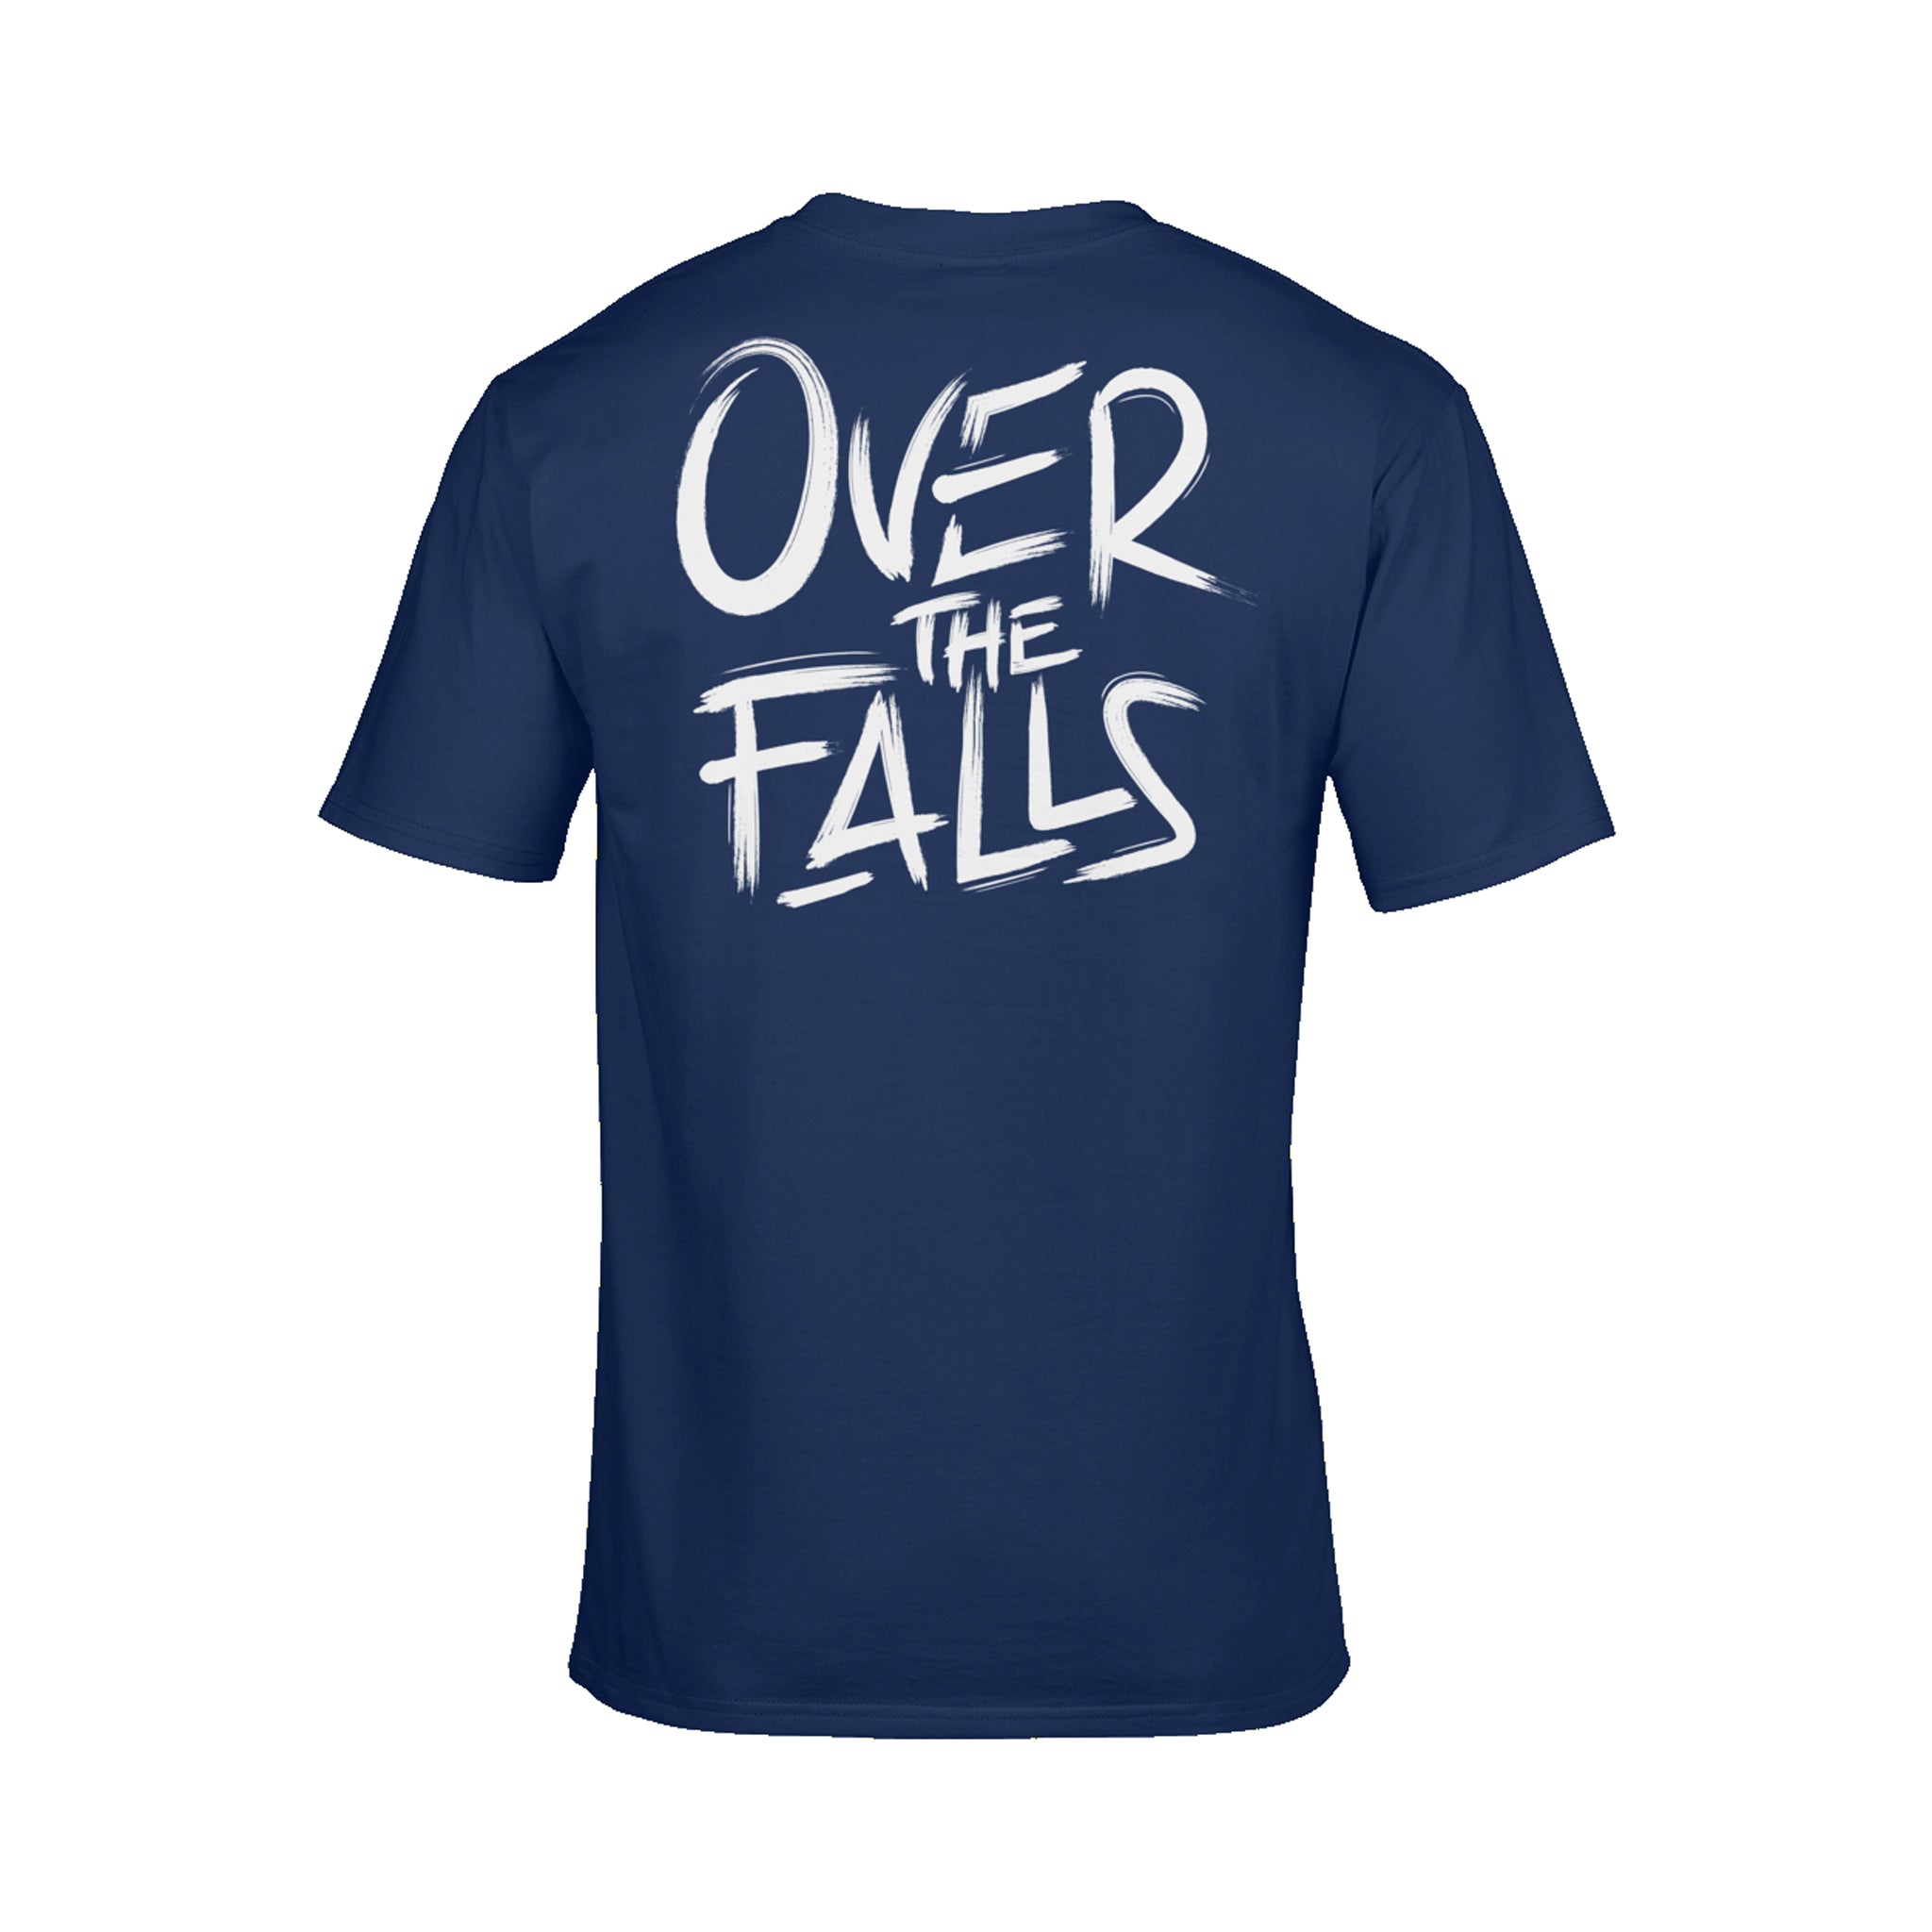 'Over The Falls' Men's T-Shirt (Outlet)